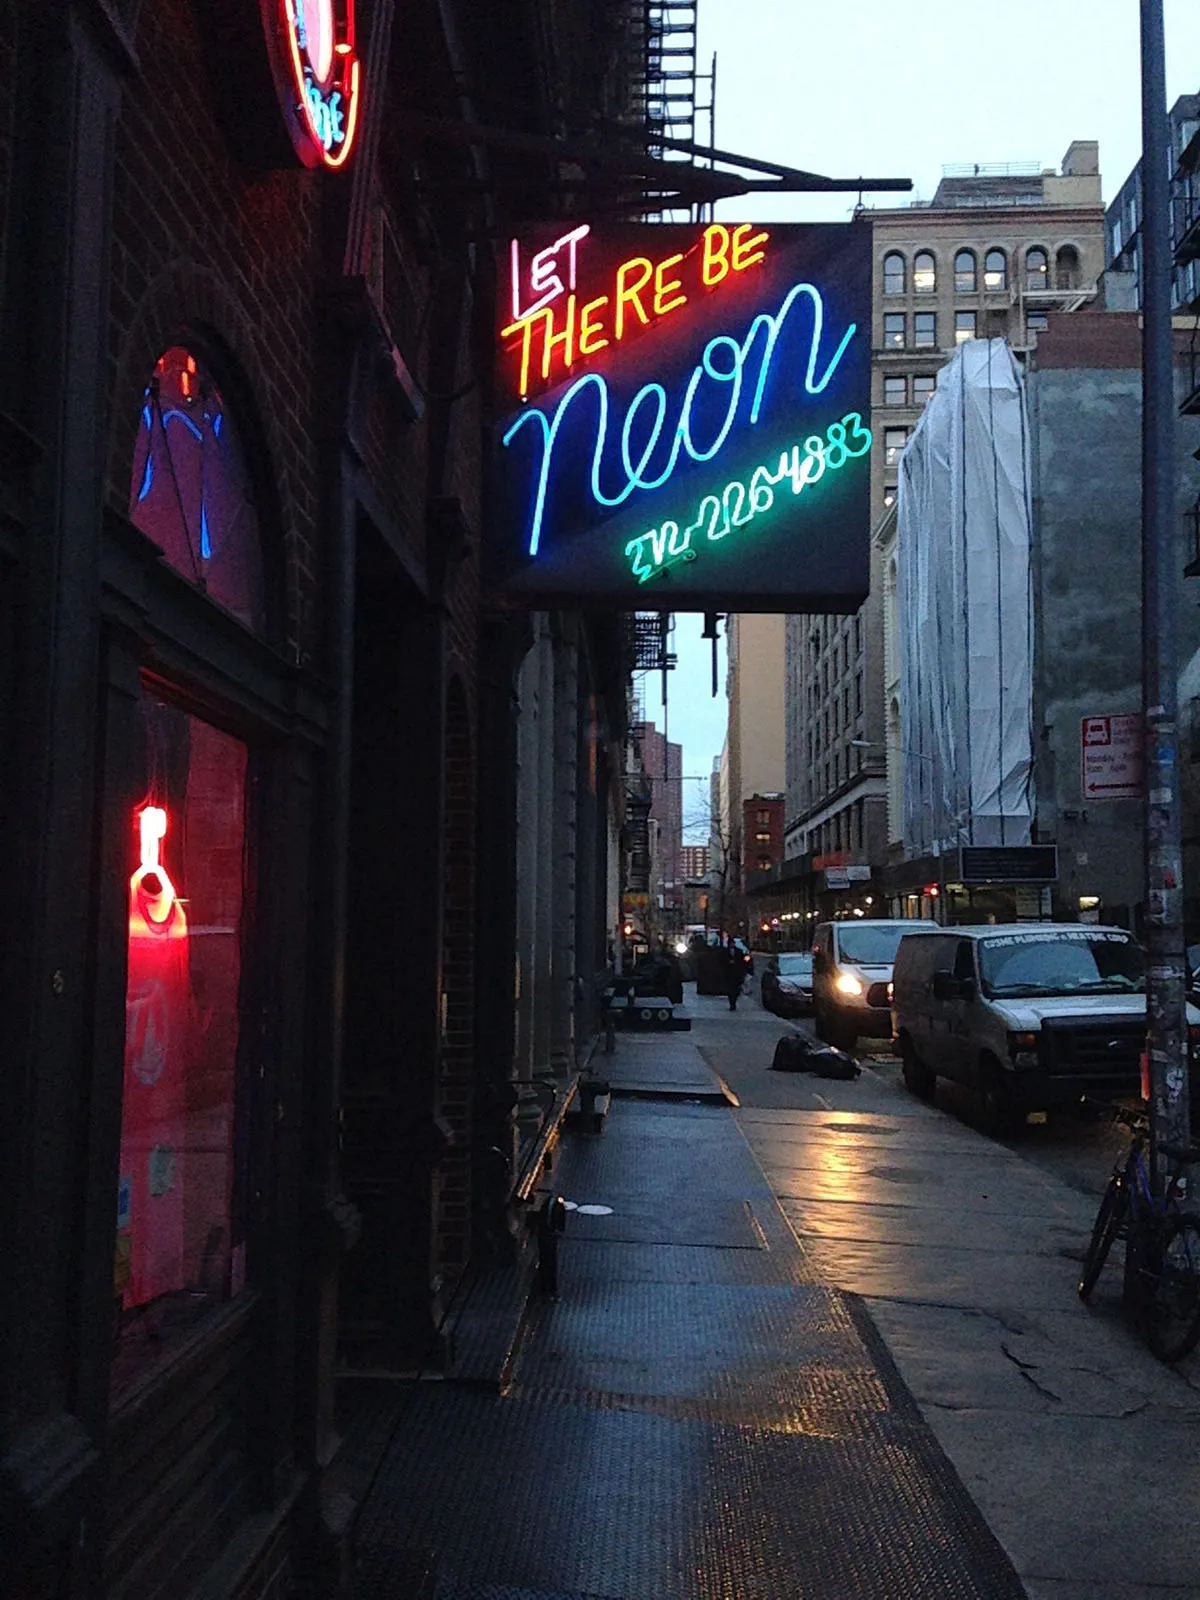 Let there be neon.